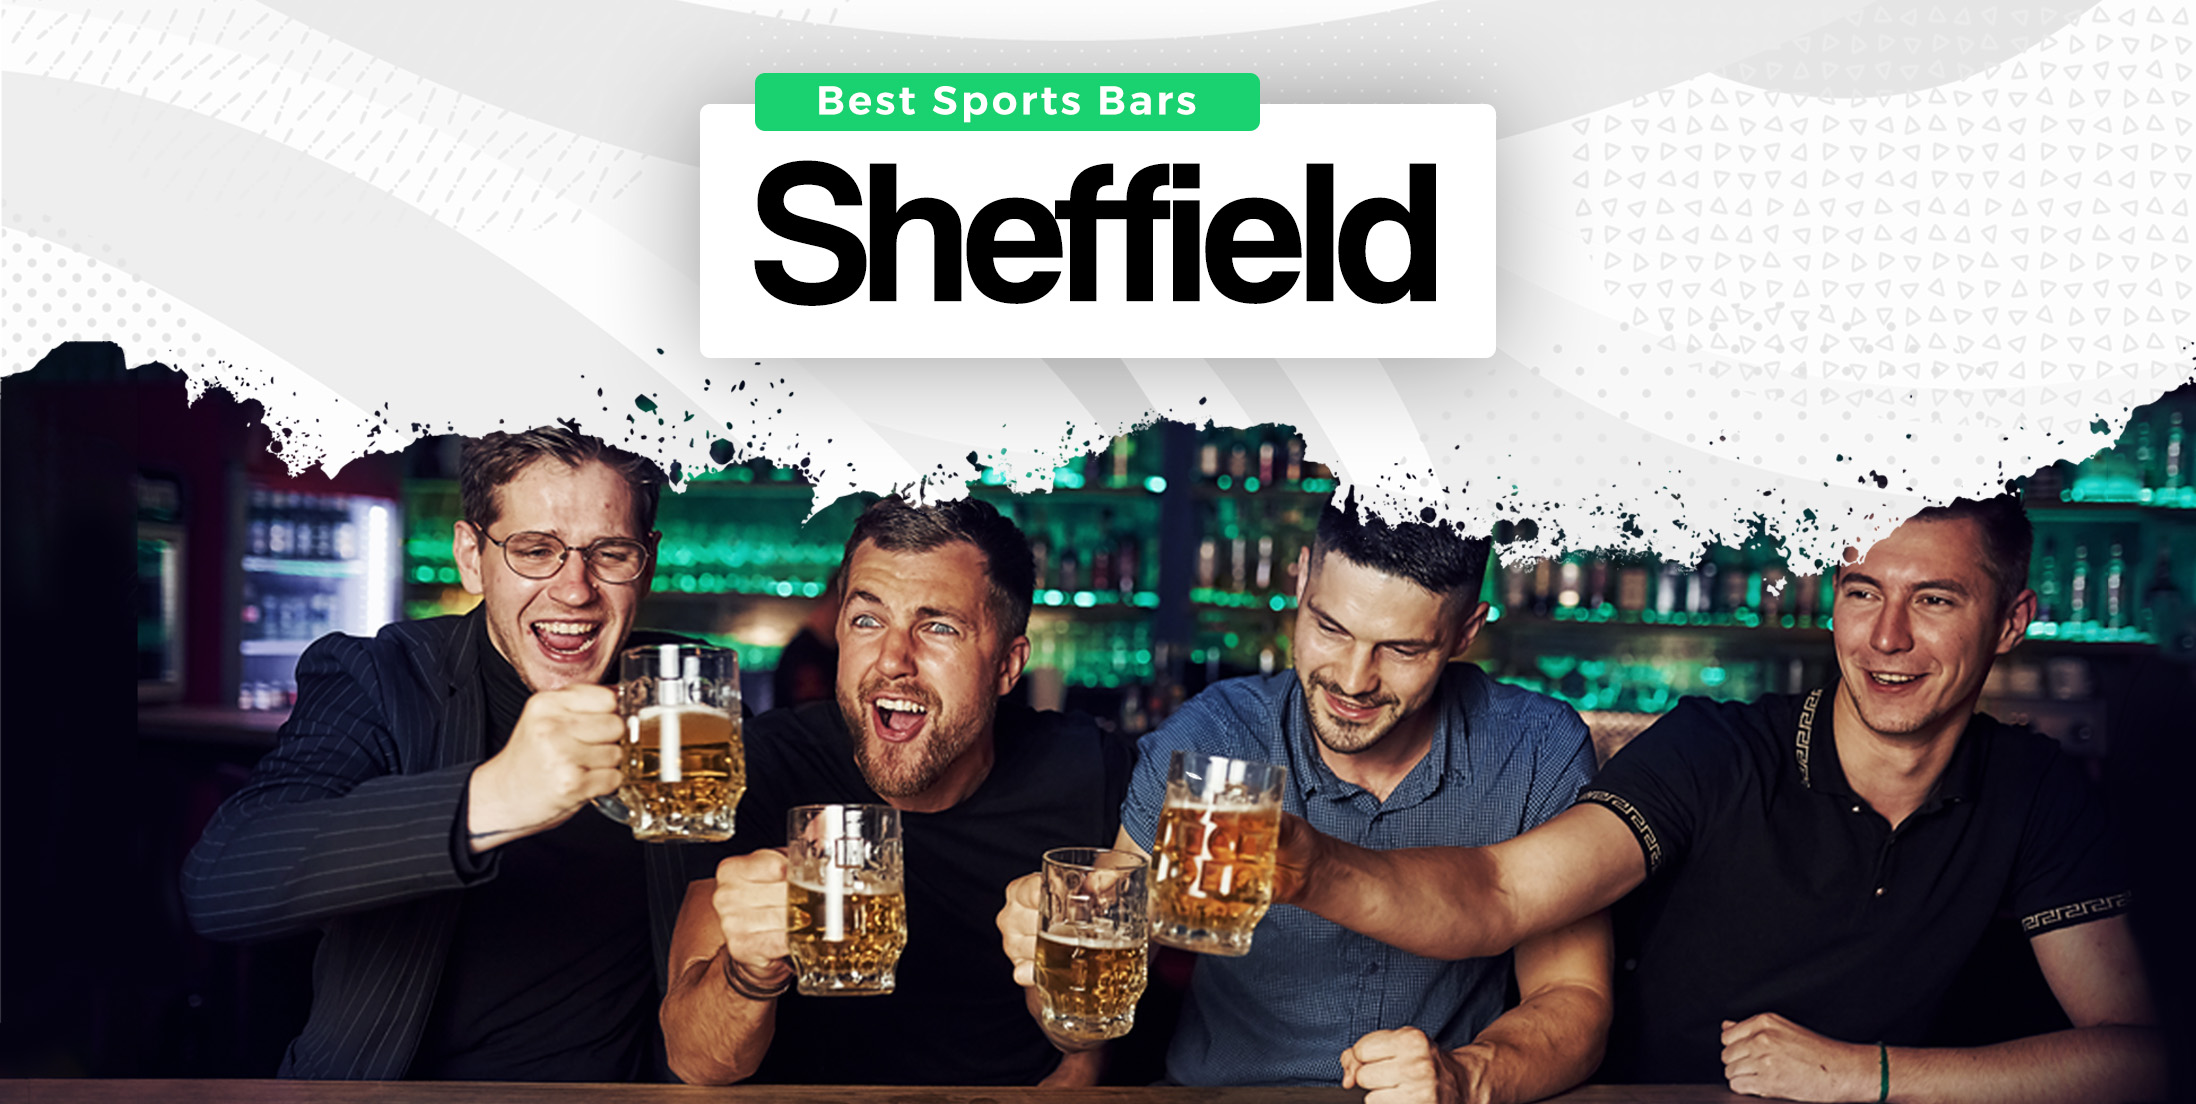 The Best Sports Bars in Sheffield